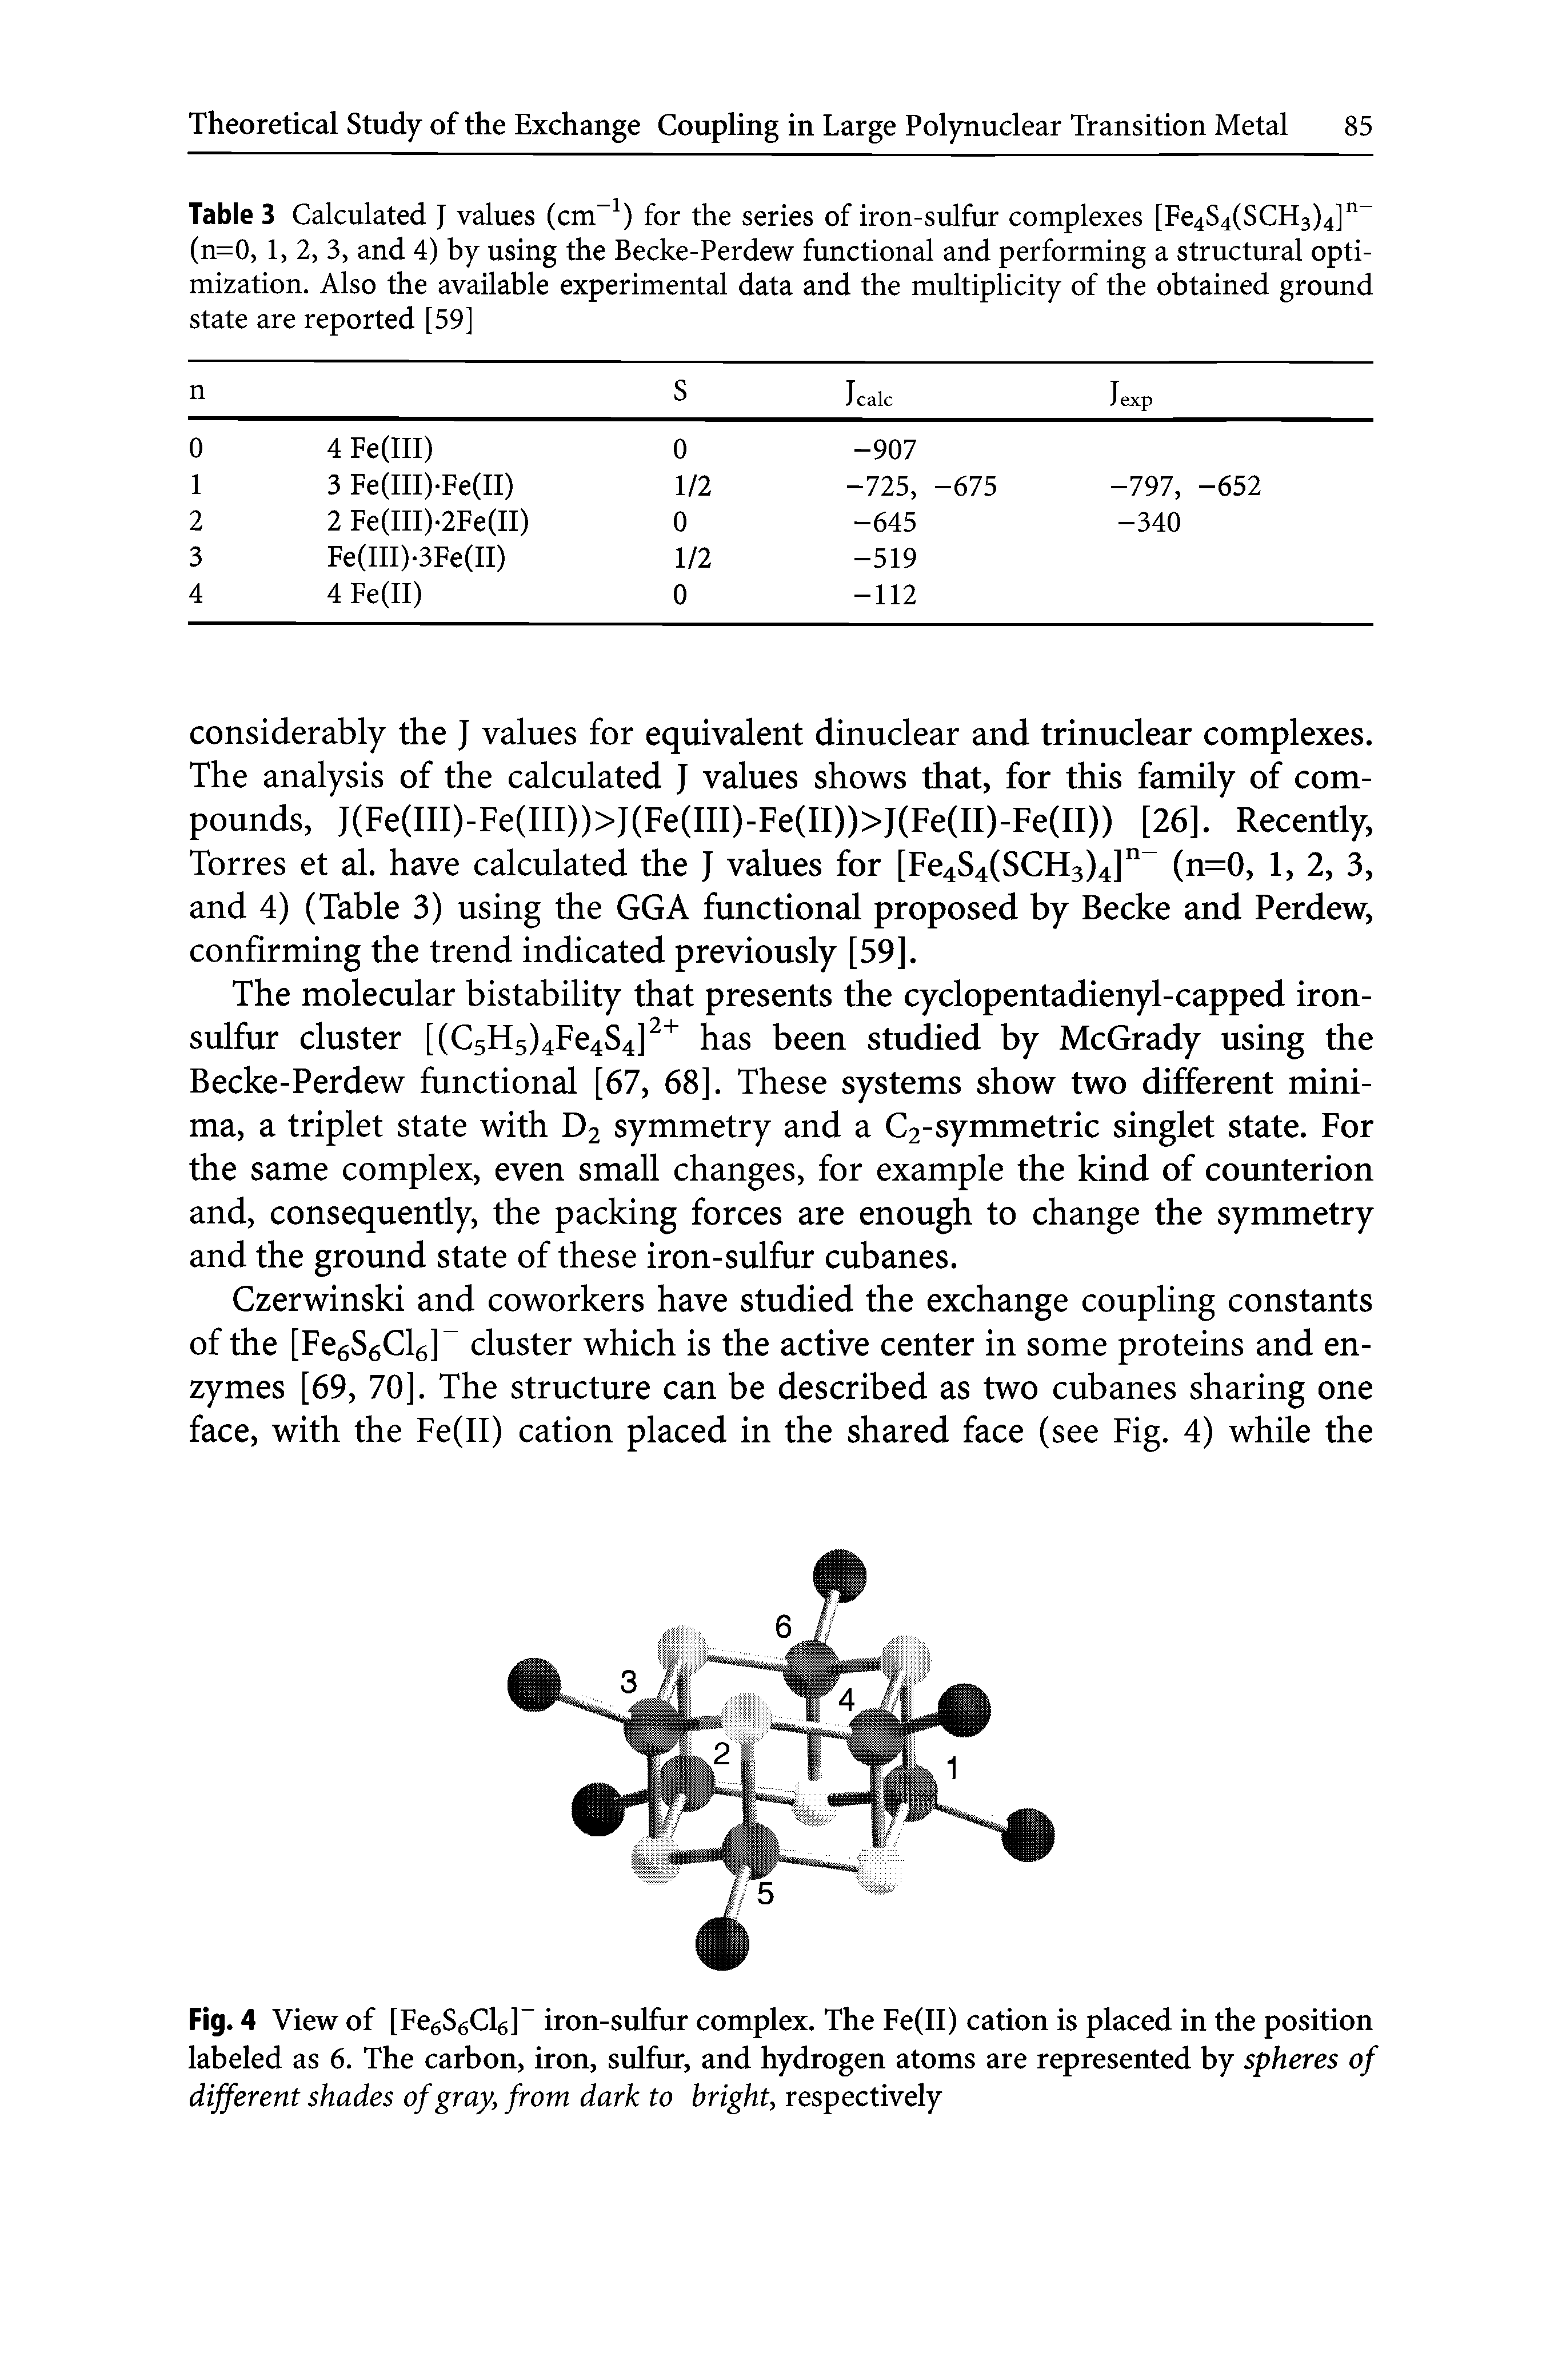 Table 3 Calculated J values (cm ) for the series of iron-sulfur complexes [Fe4S4(SCH3)4] (n=0, 1, 2, 3, and 4) by using the Becke-Perdew functional and performing a structural optimization, Also the available experimental data and the multiplicity of the obtained ground state are reported [59]...